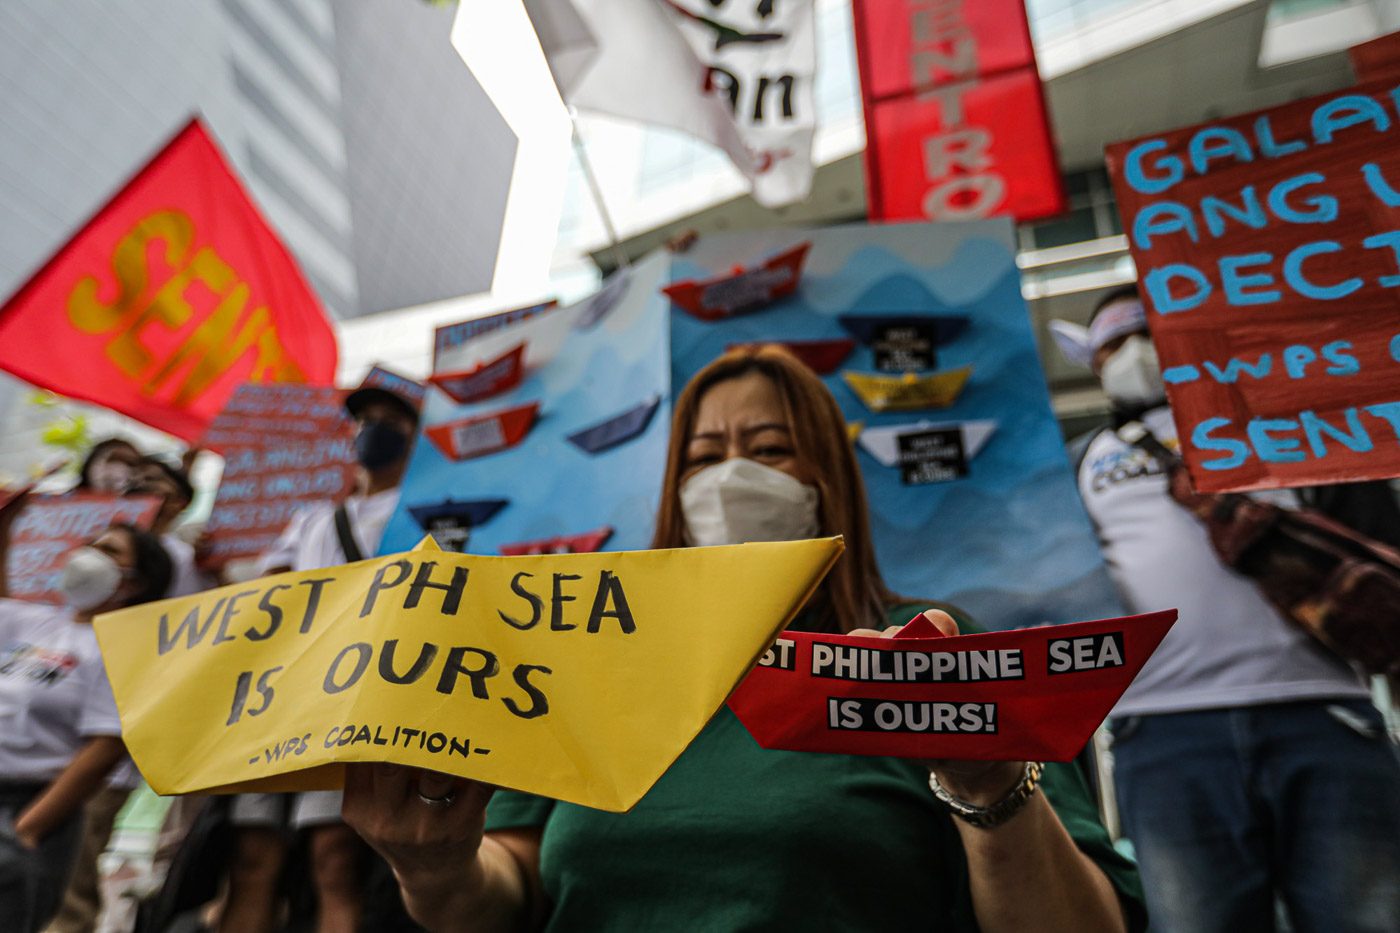 Ahead of Marcos visit, Chinese state media downplays South China Sea dispute